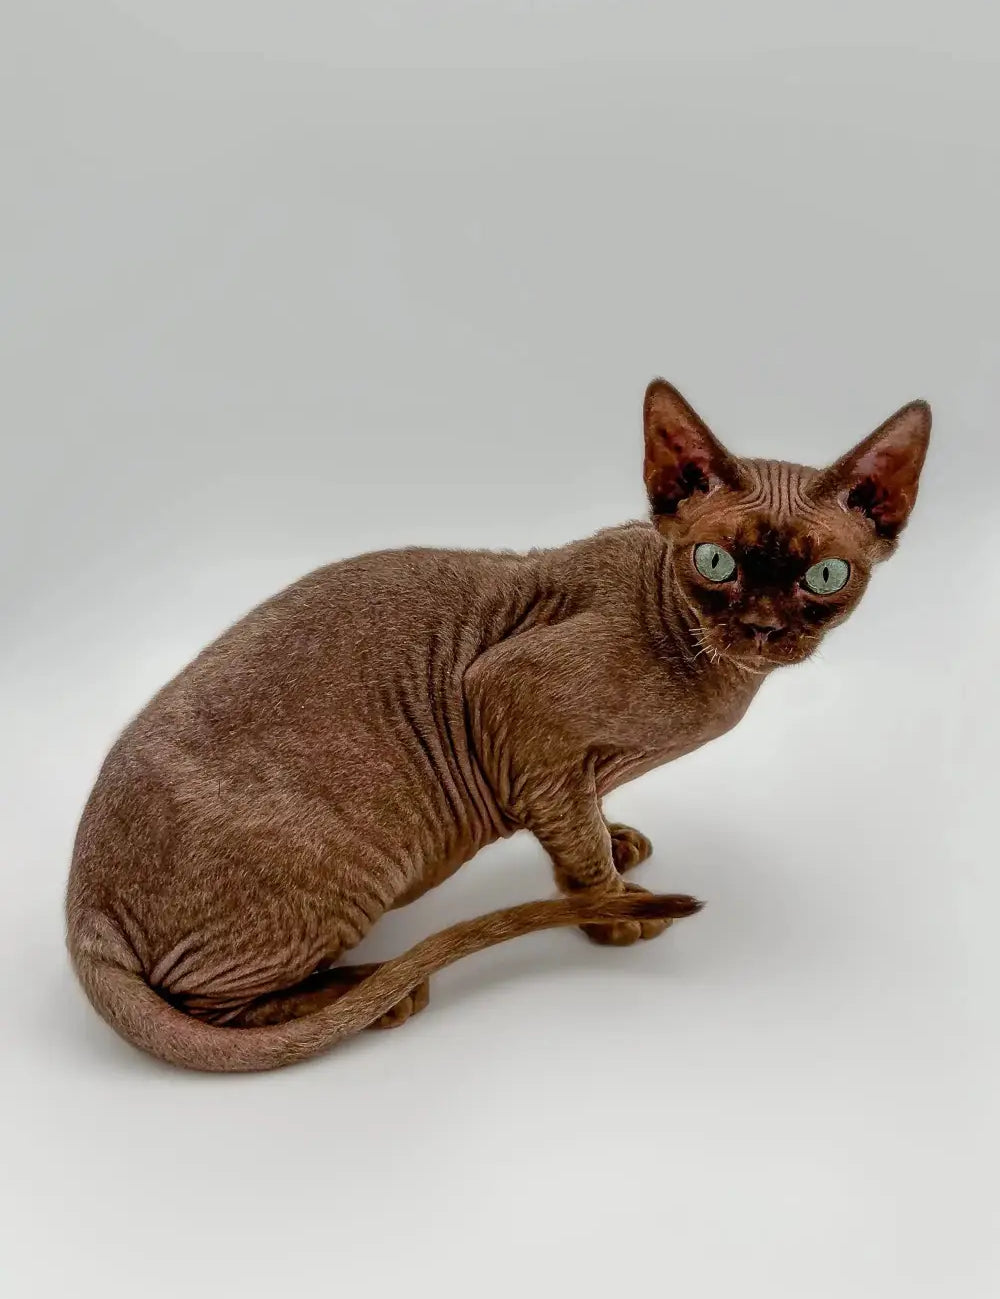 What Is Your Devon Rex Cat Trying to Tell You